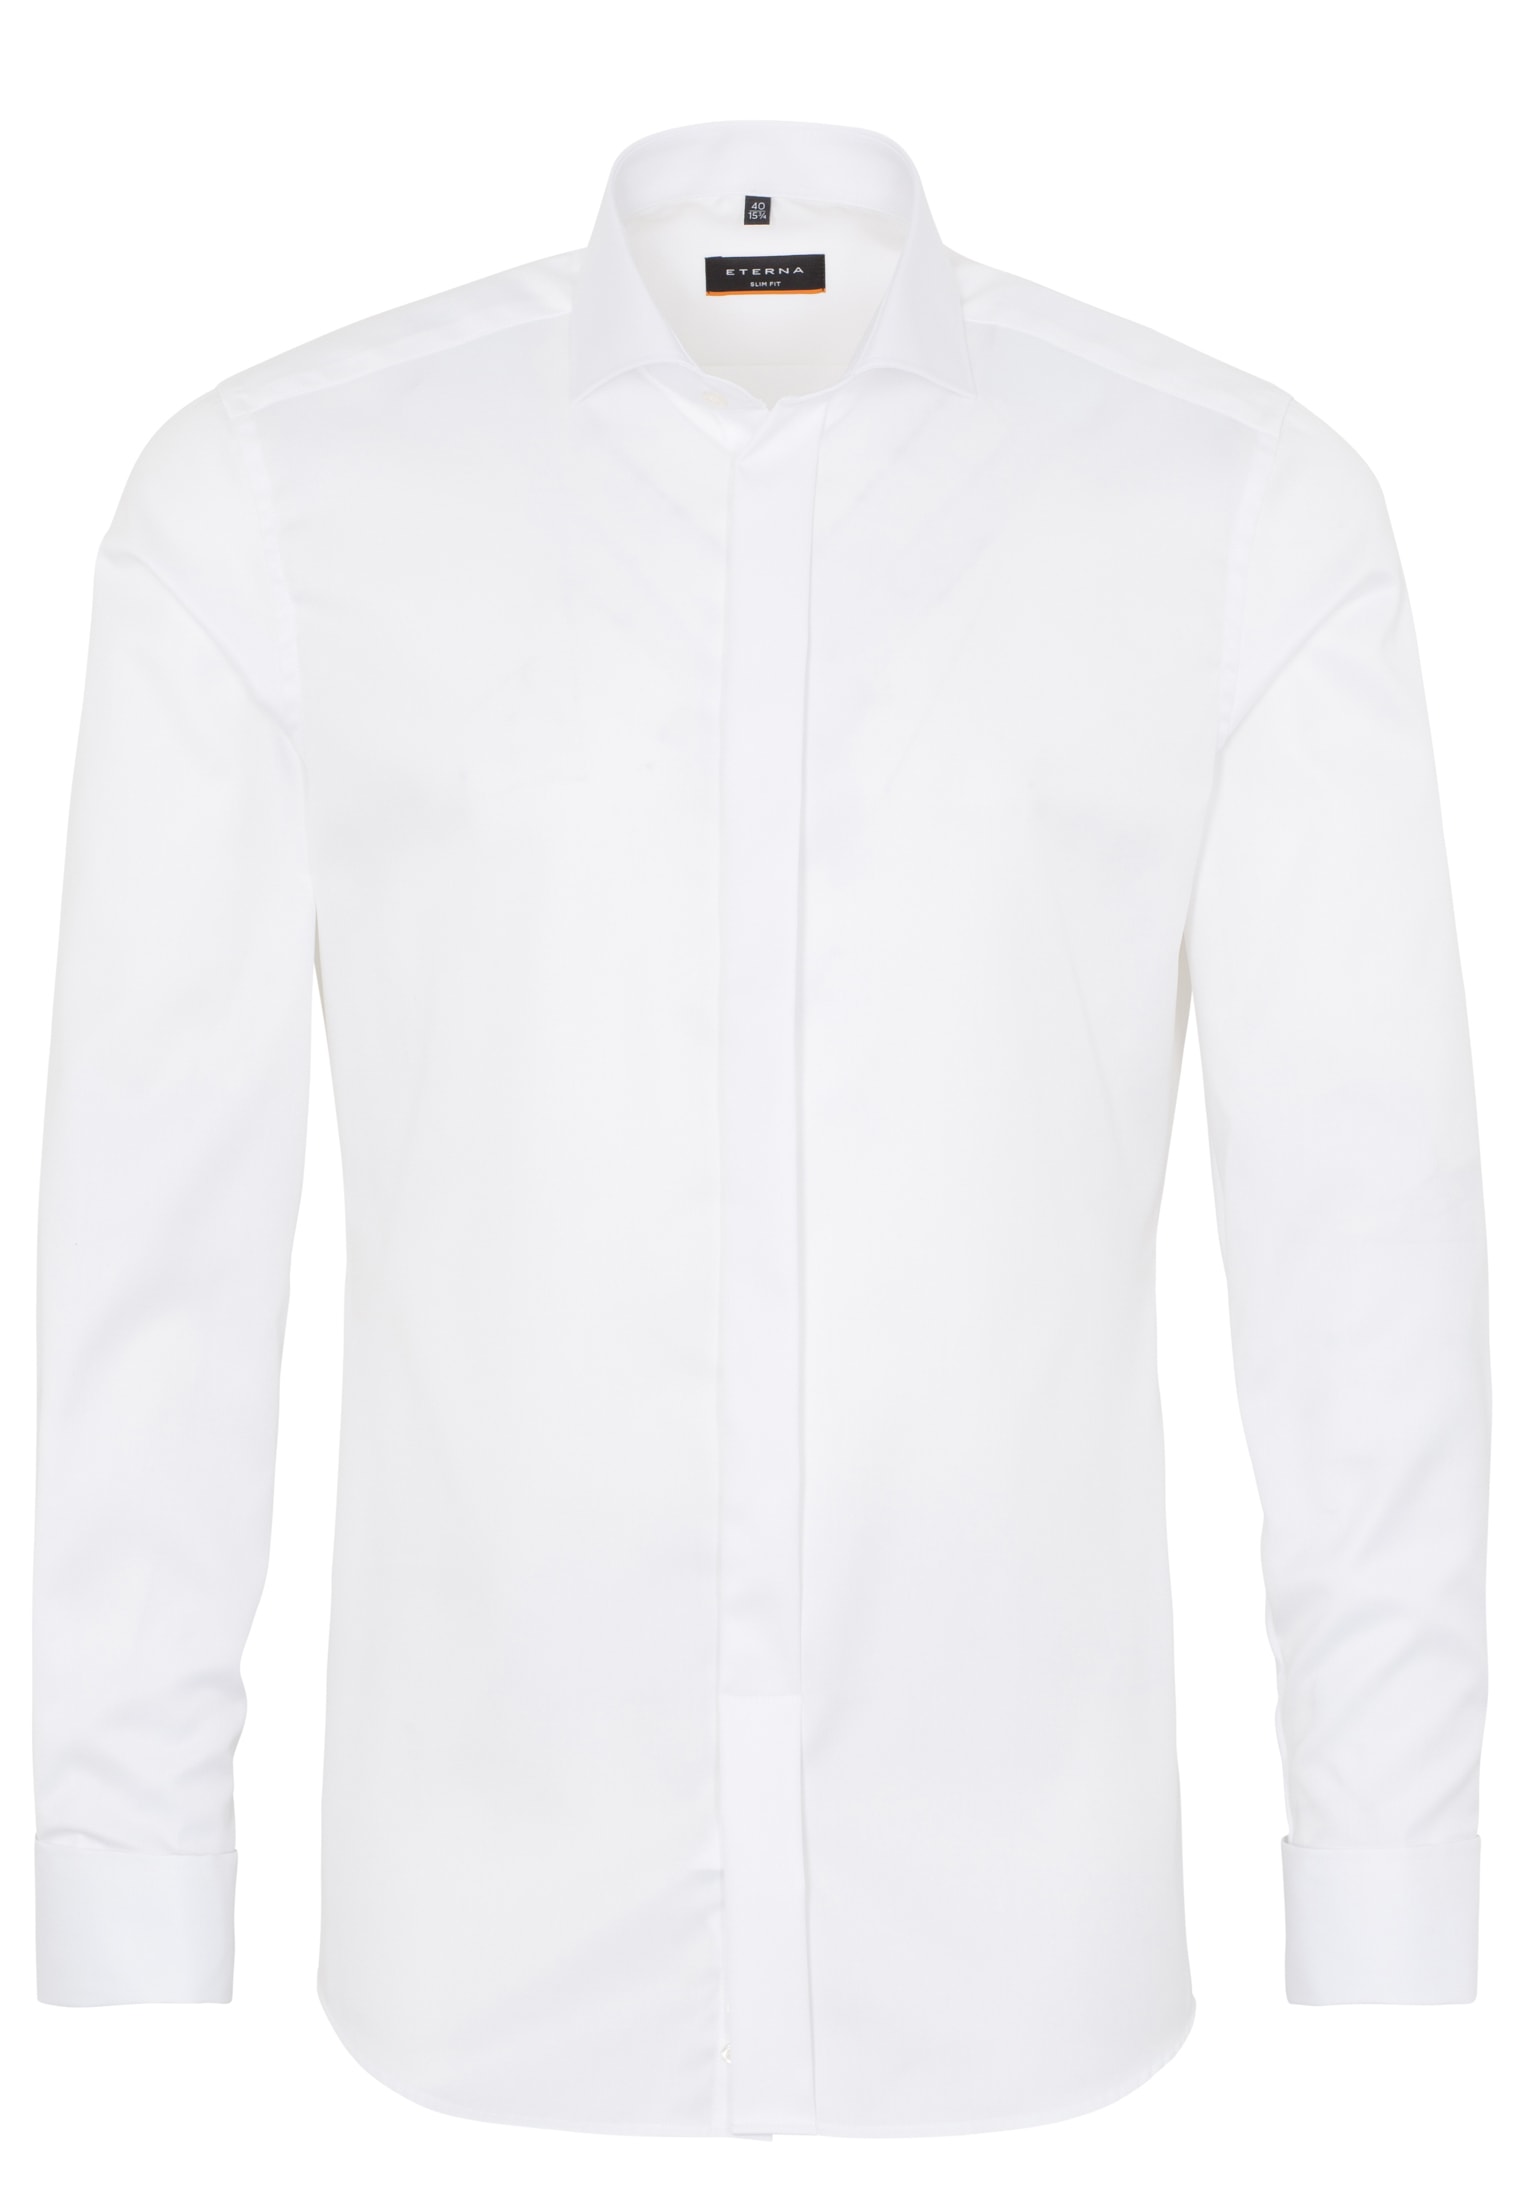 SLIM FIT Cover Shirt in champagne plain